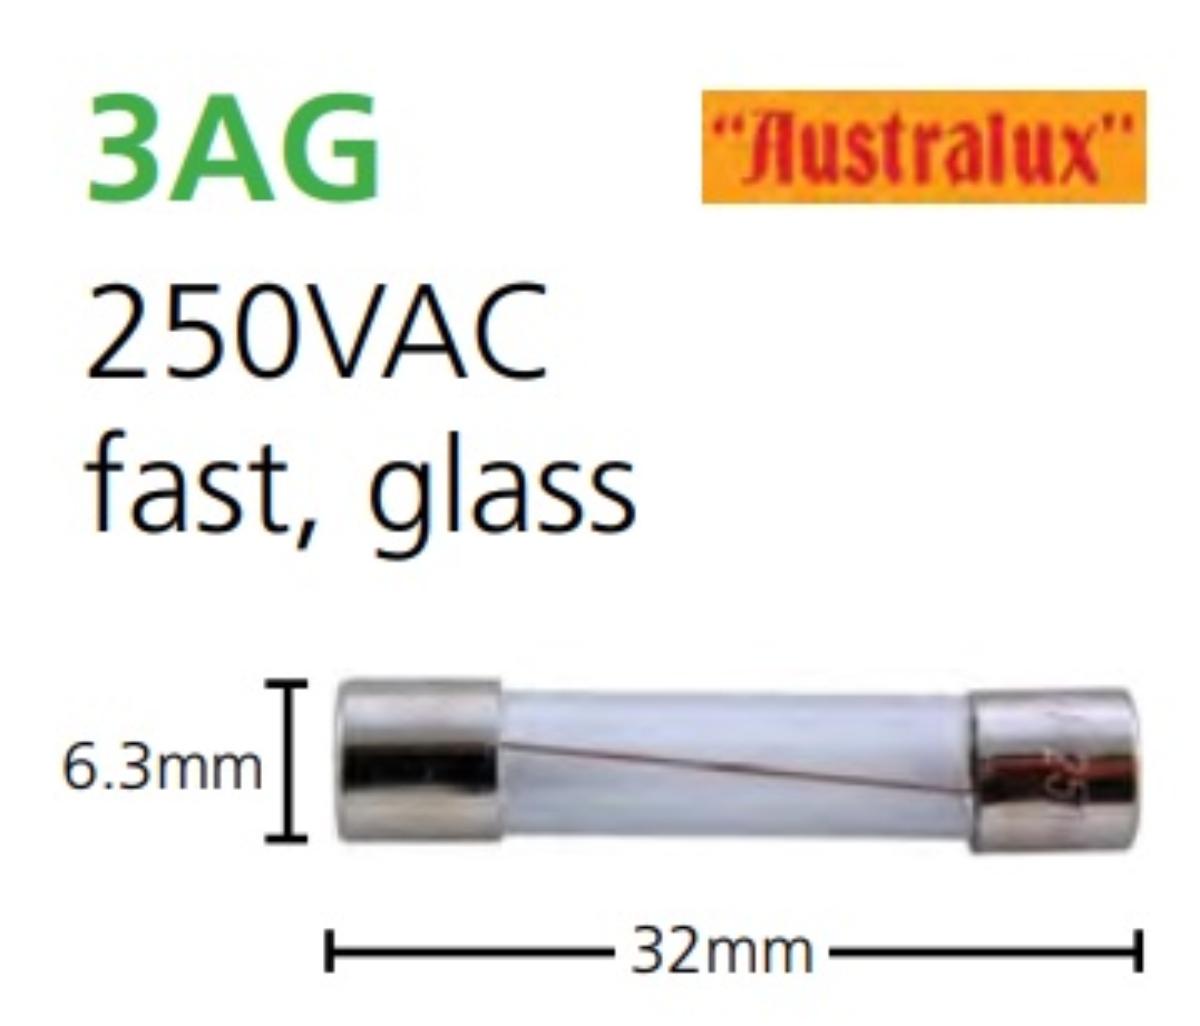 3AG GLASS FUSE FAST 250V 15A 32X6.3MM